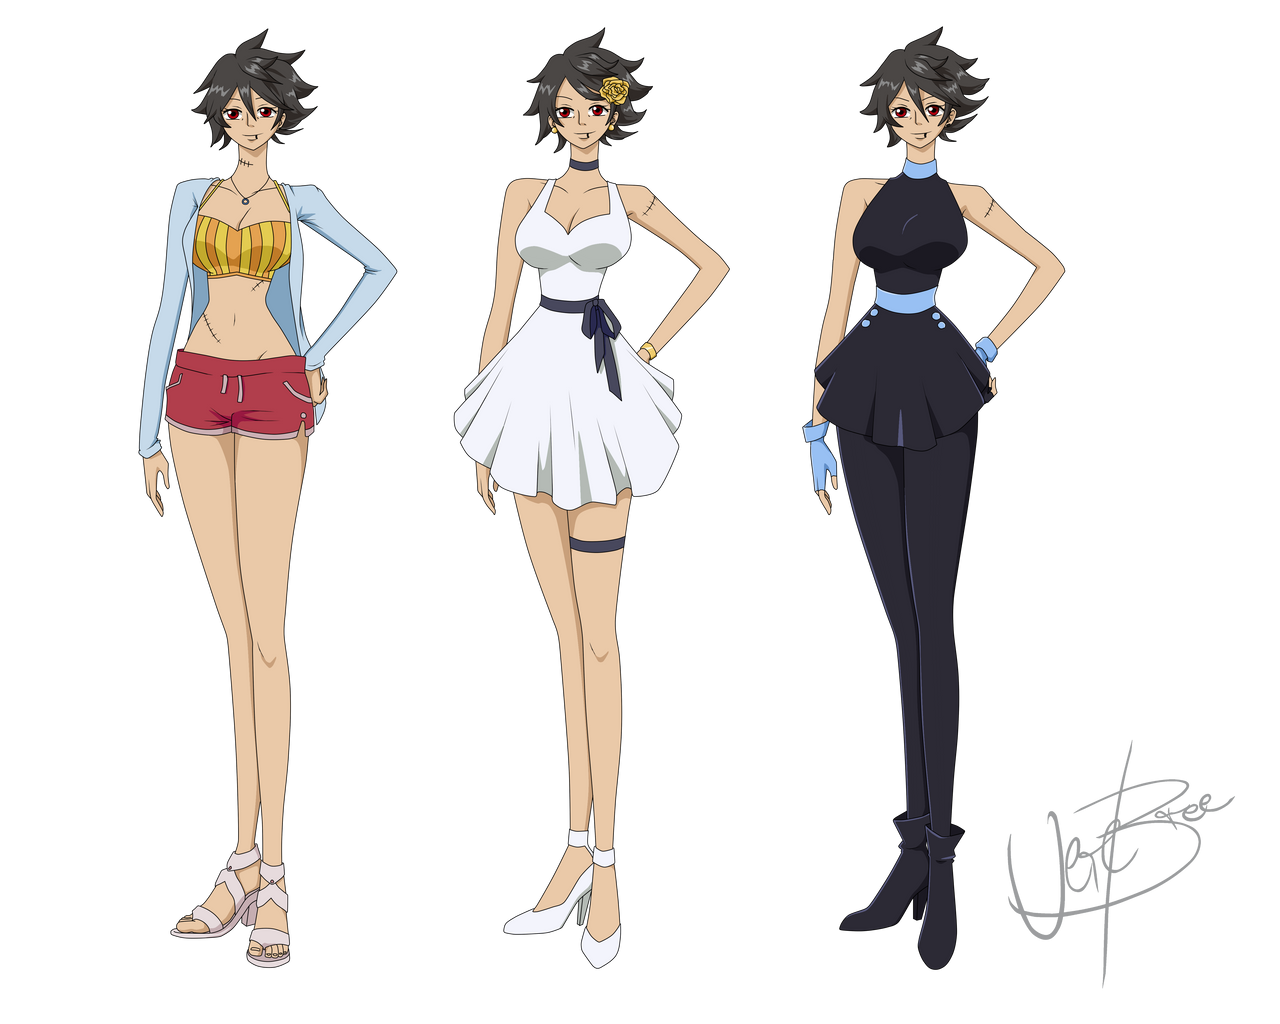 One Piece GOLD - Zoy's outfits by VereBree on DeviantArt